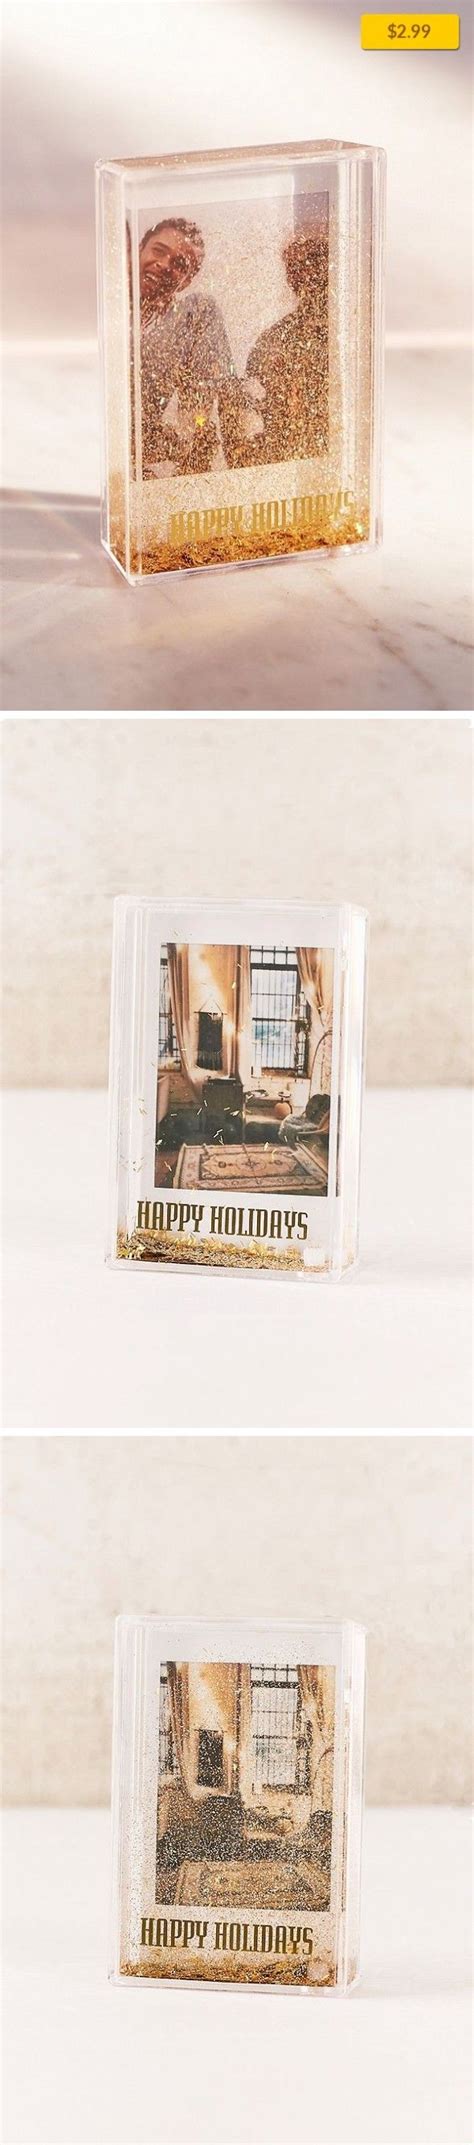 Mini Instax Happy Holidays Glitter Picture Frame Sale